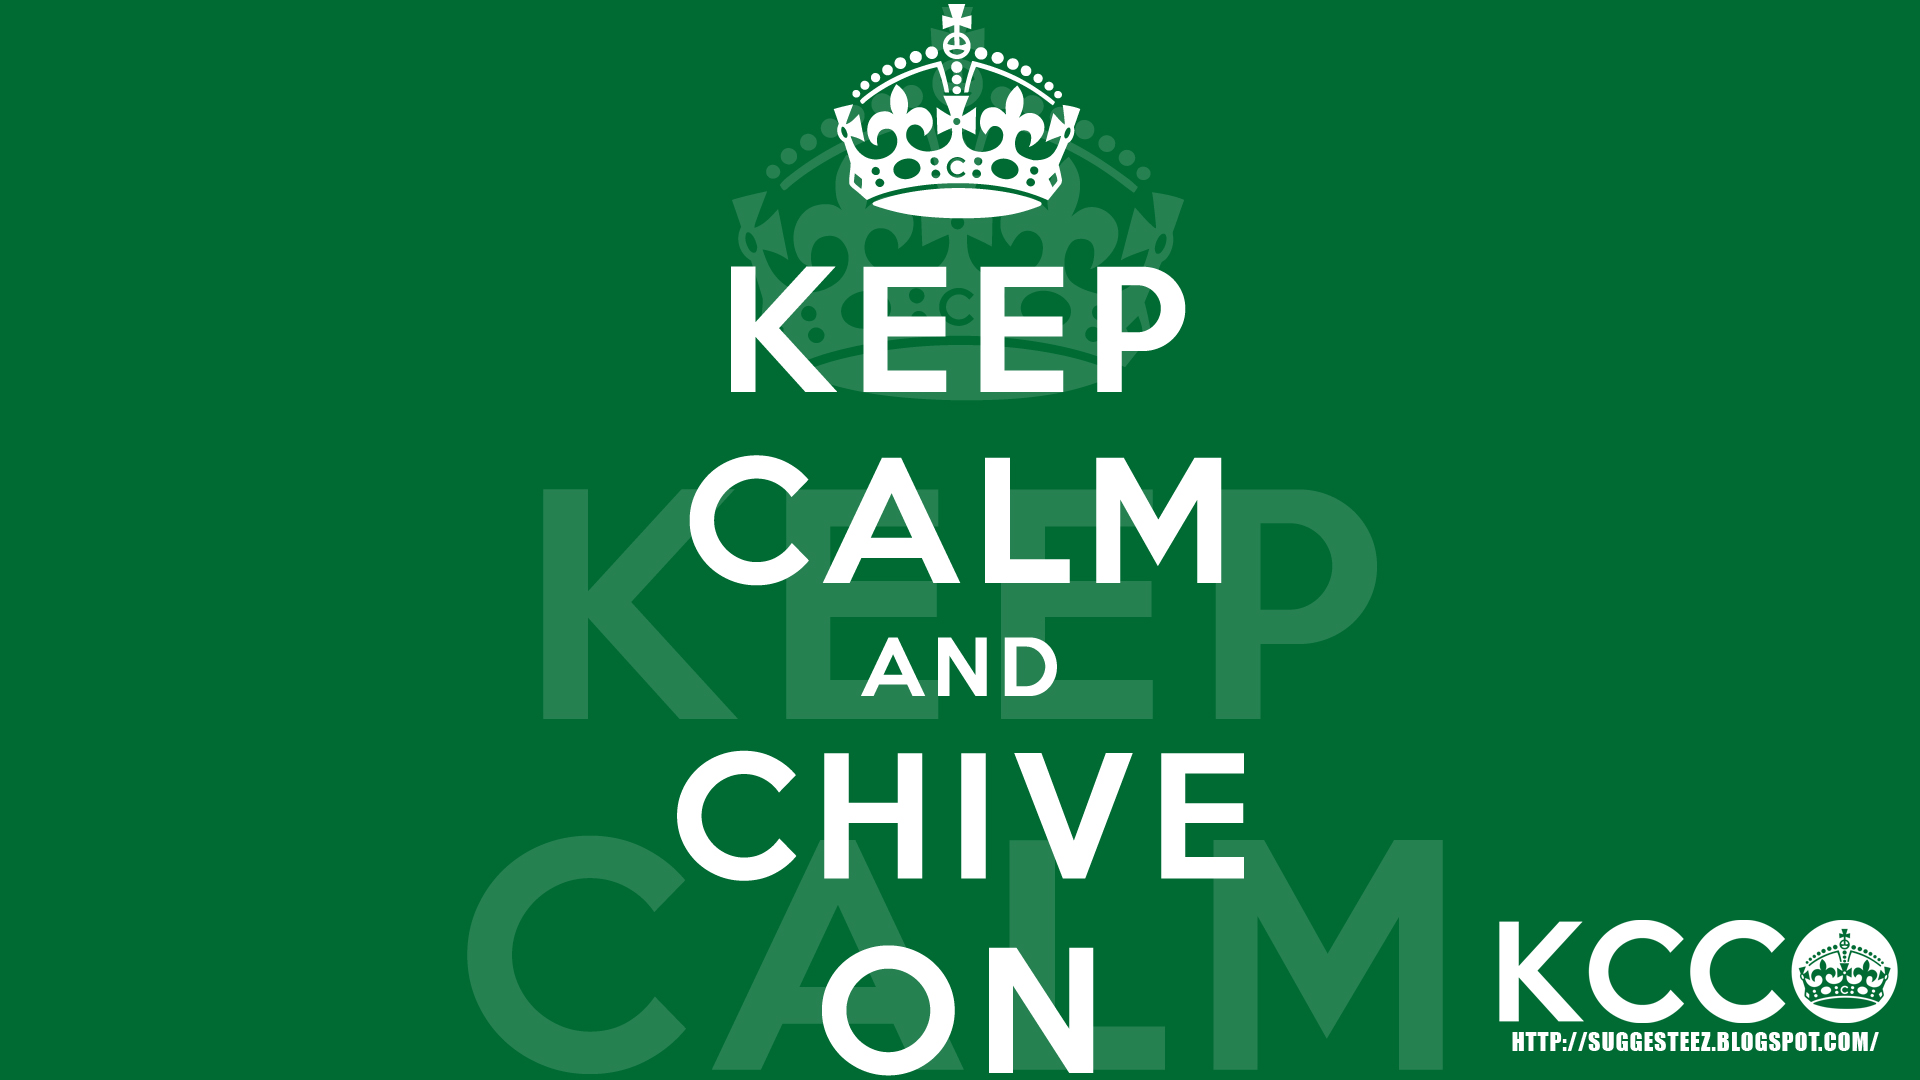 Thechive HD Wallpaper By Suggesteez Customization Other